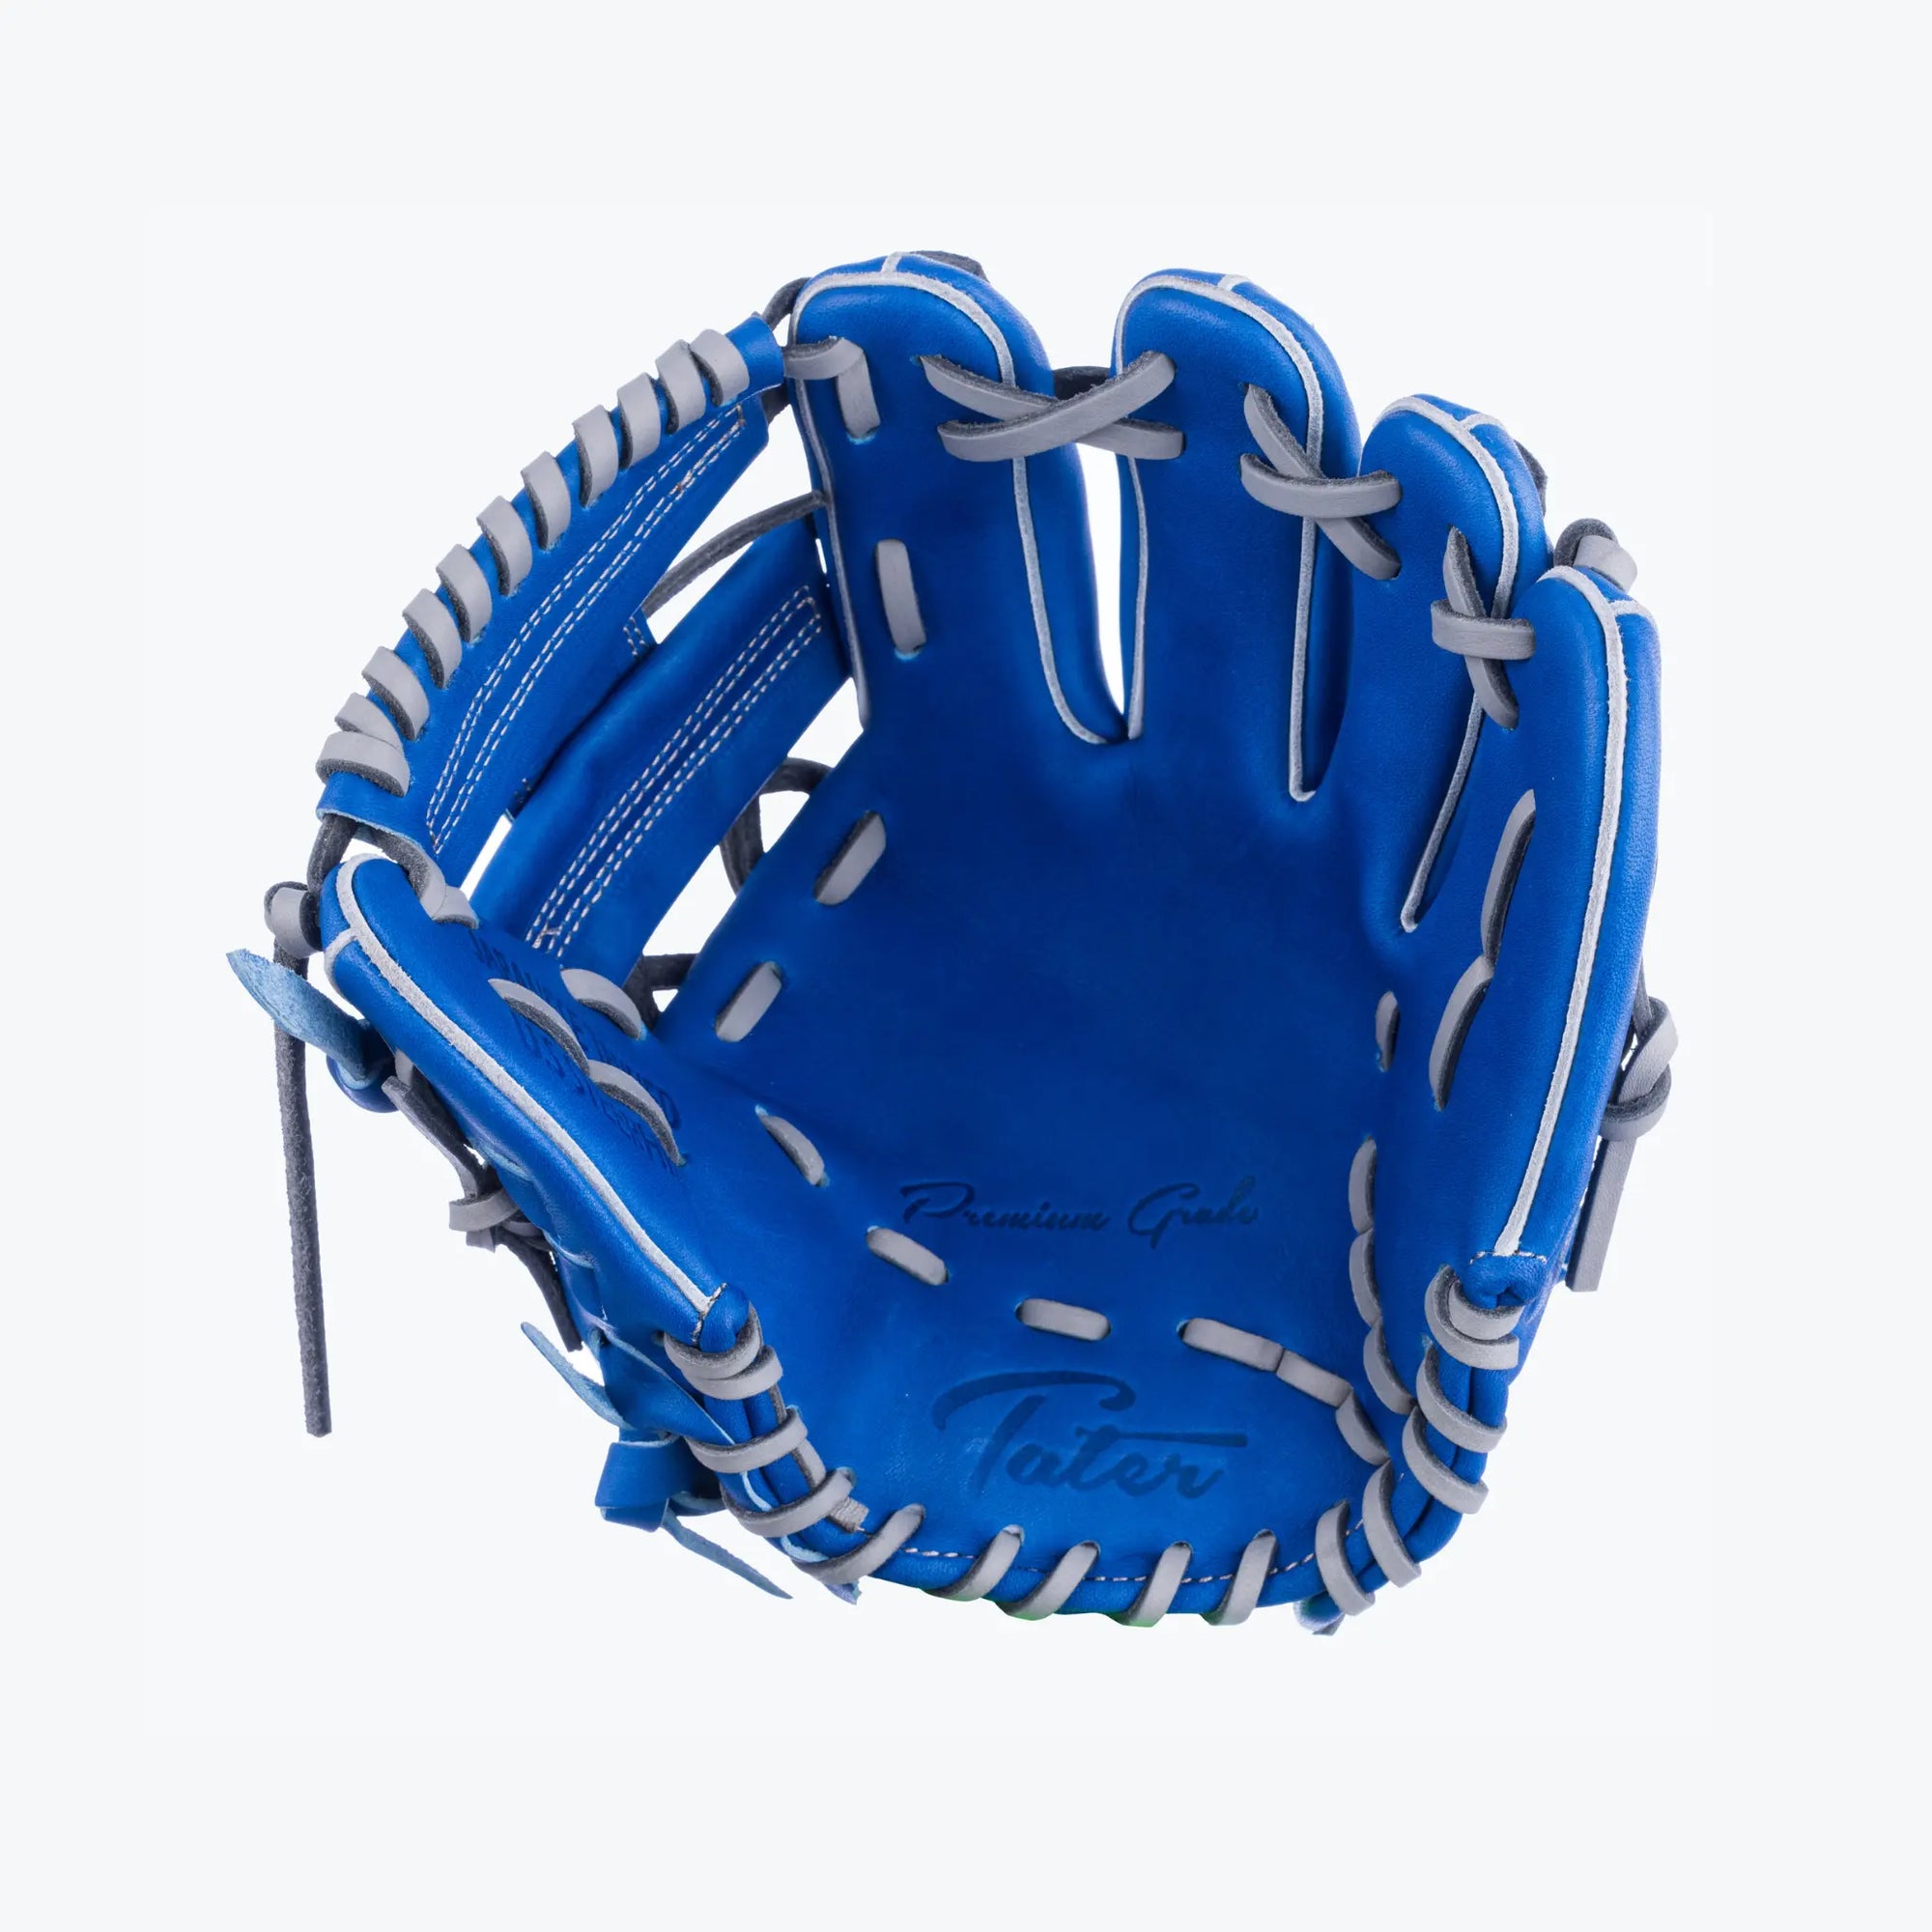 Professional blue premium infield training glove, 9.5-inch, with grey lacing and 'Play to Keeps' inscription, designed for high-level performance by Tater Baseball.